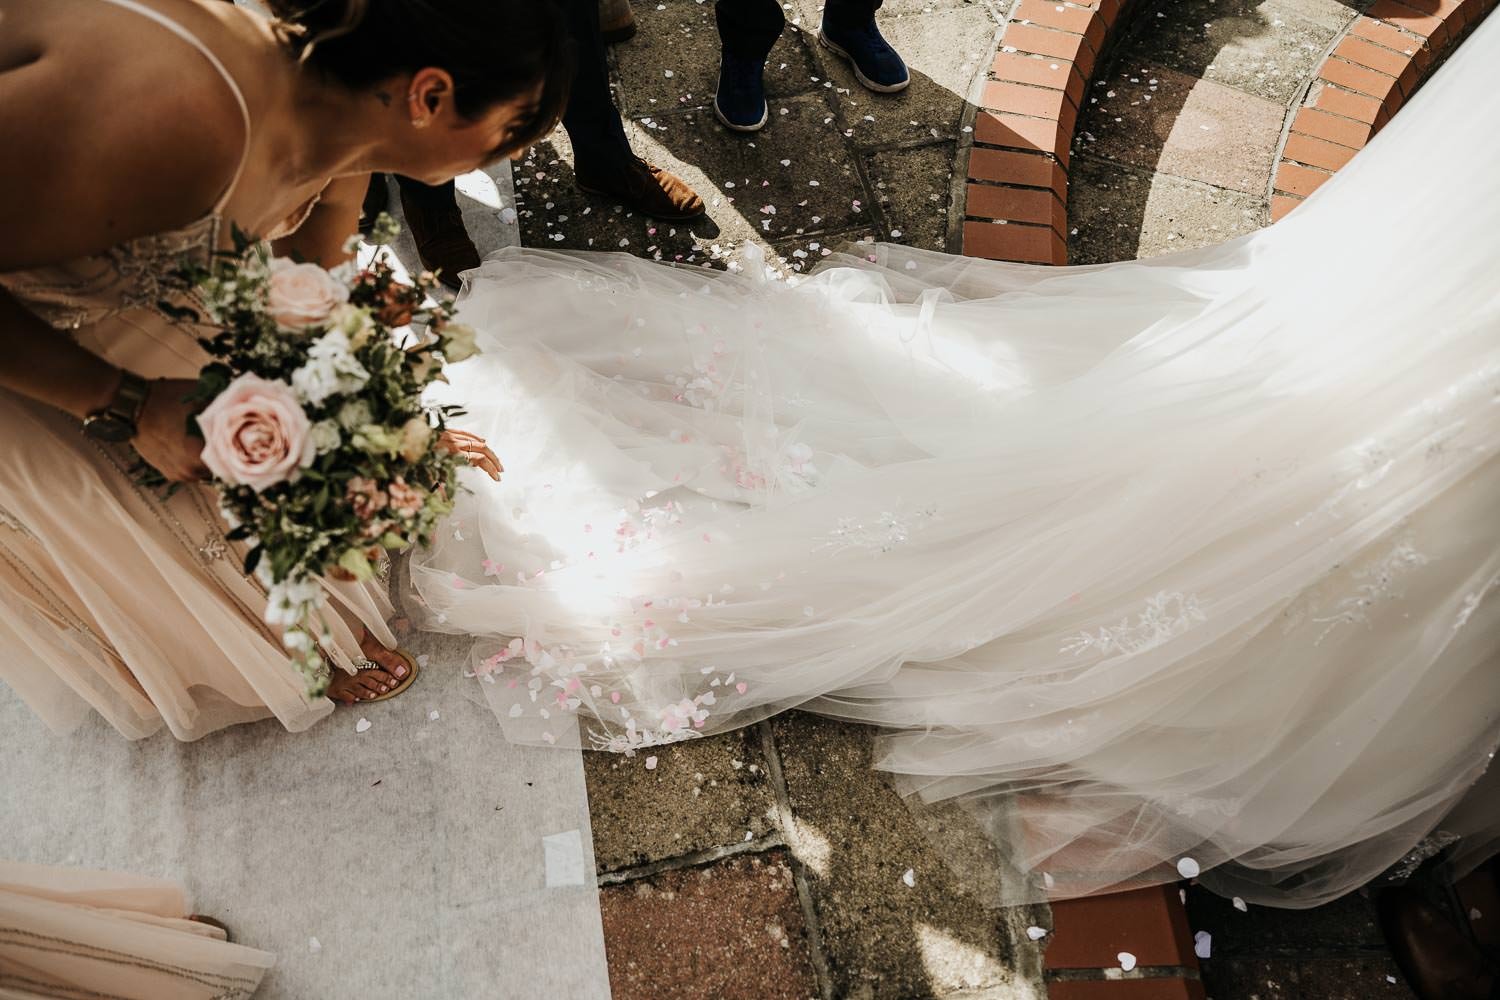 Confetti scattered across the train of brides wedding dress with bridesmaid helping to straighten train